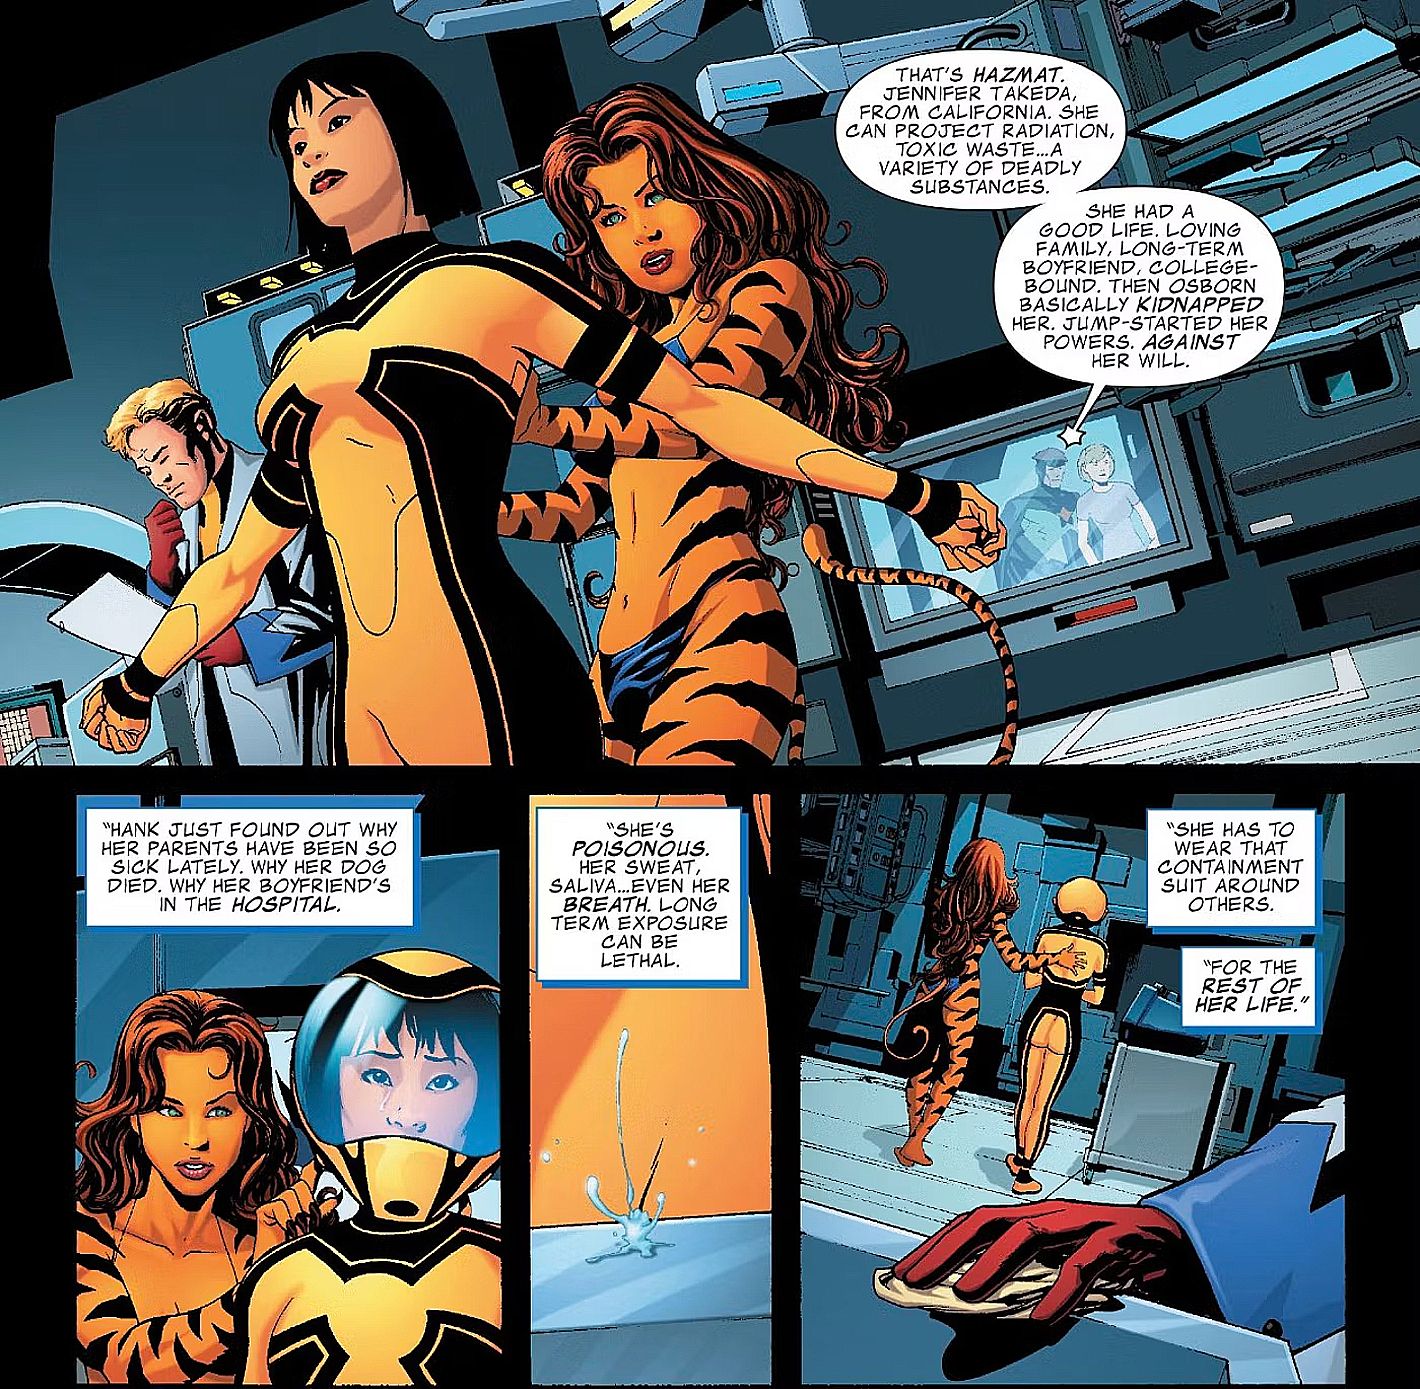 Jennifer Takeda, Avengers Hero known as Hazmat, is introduced in the pages of Avengers Academy